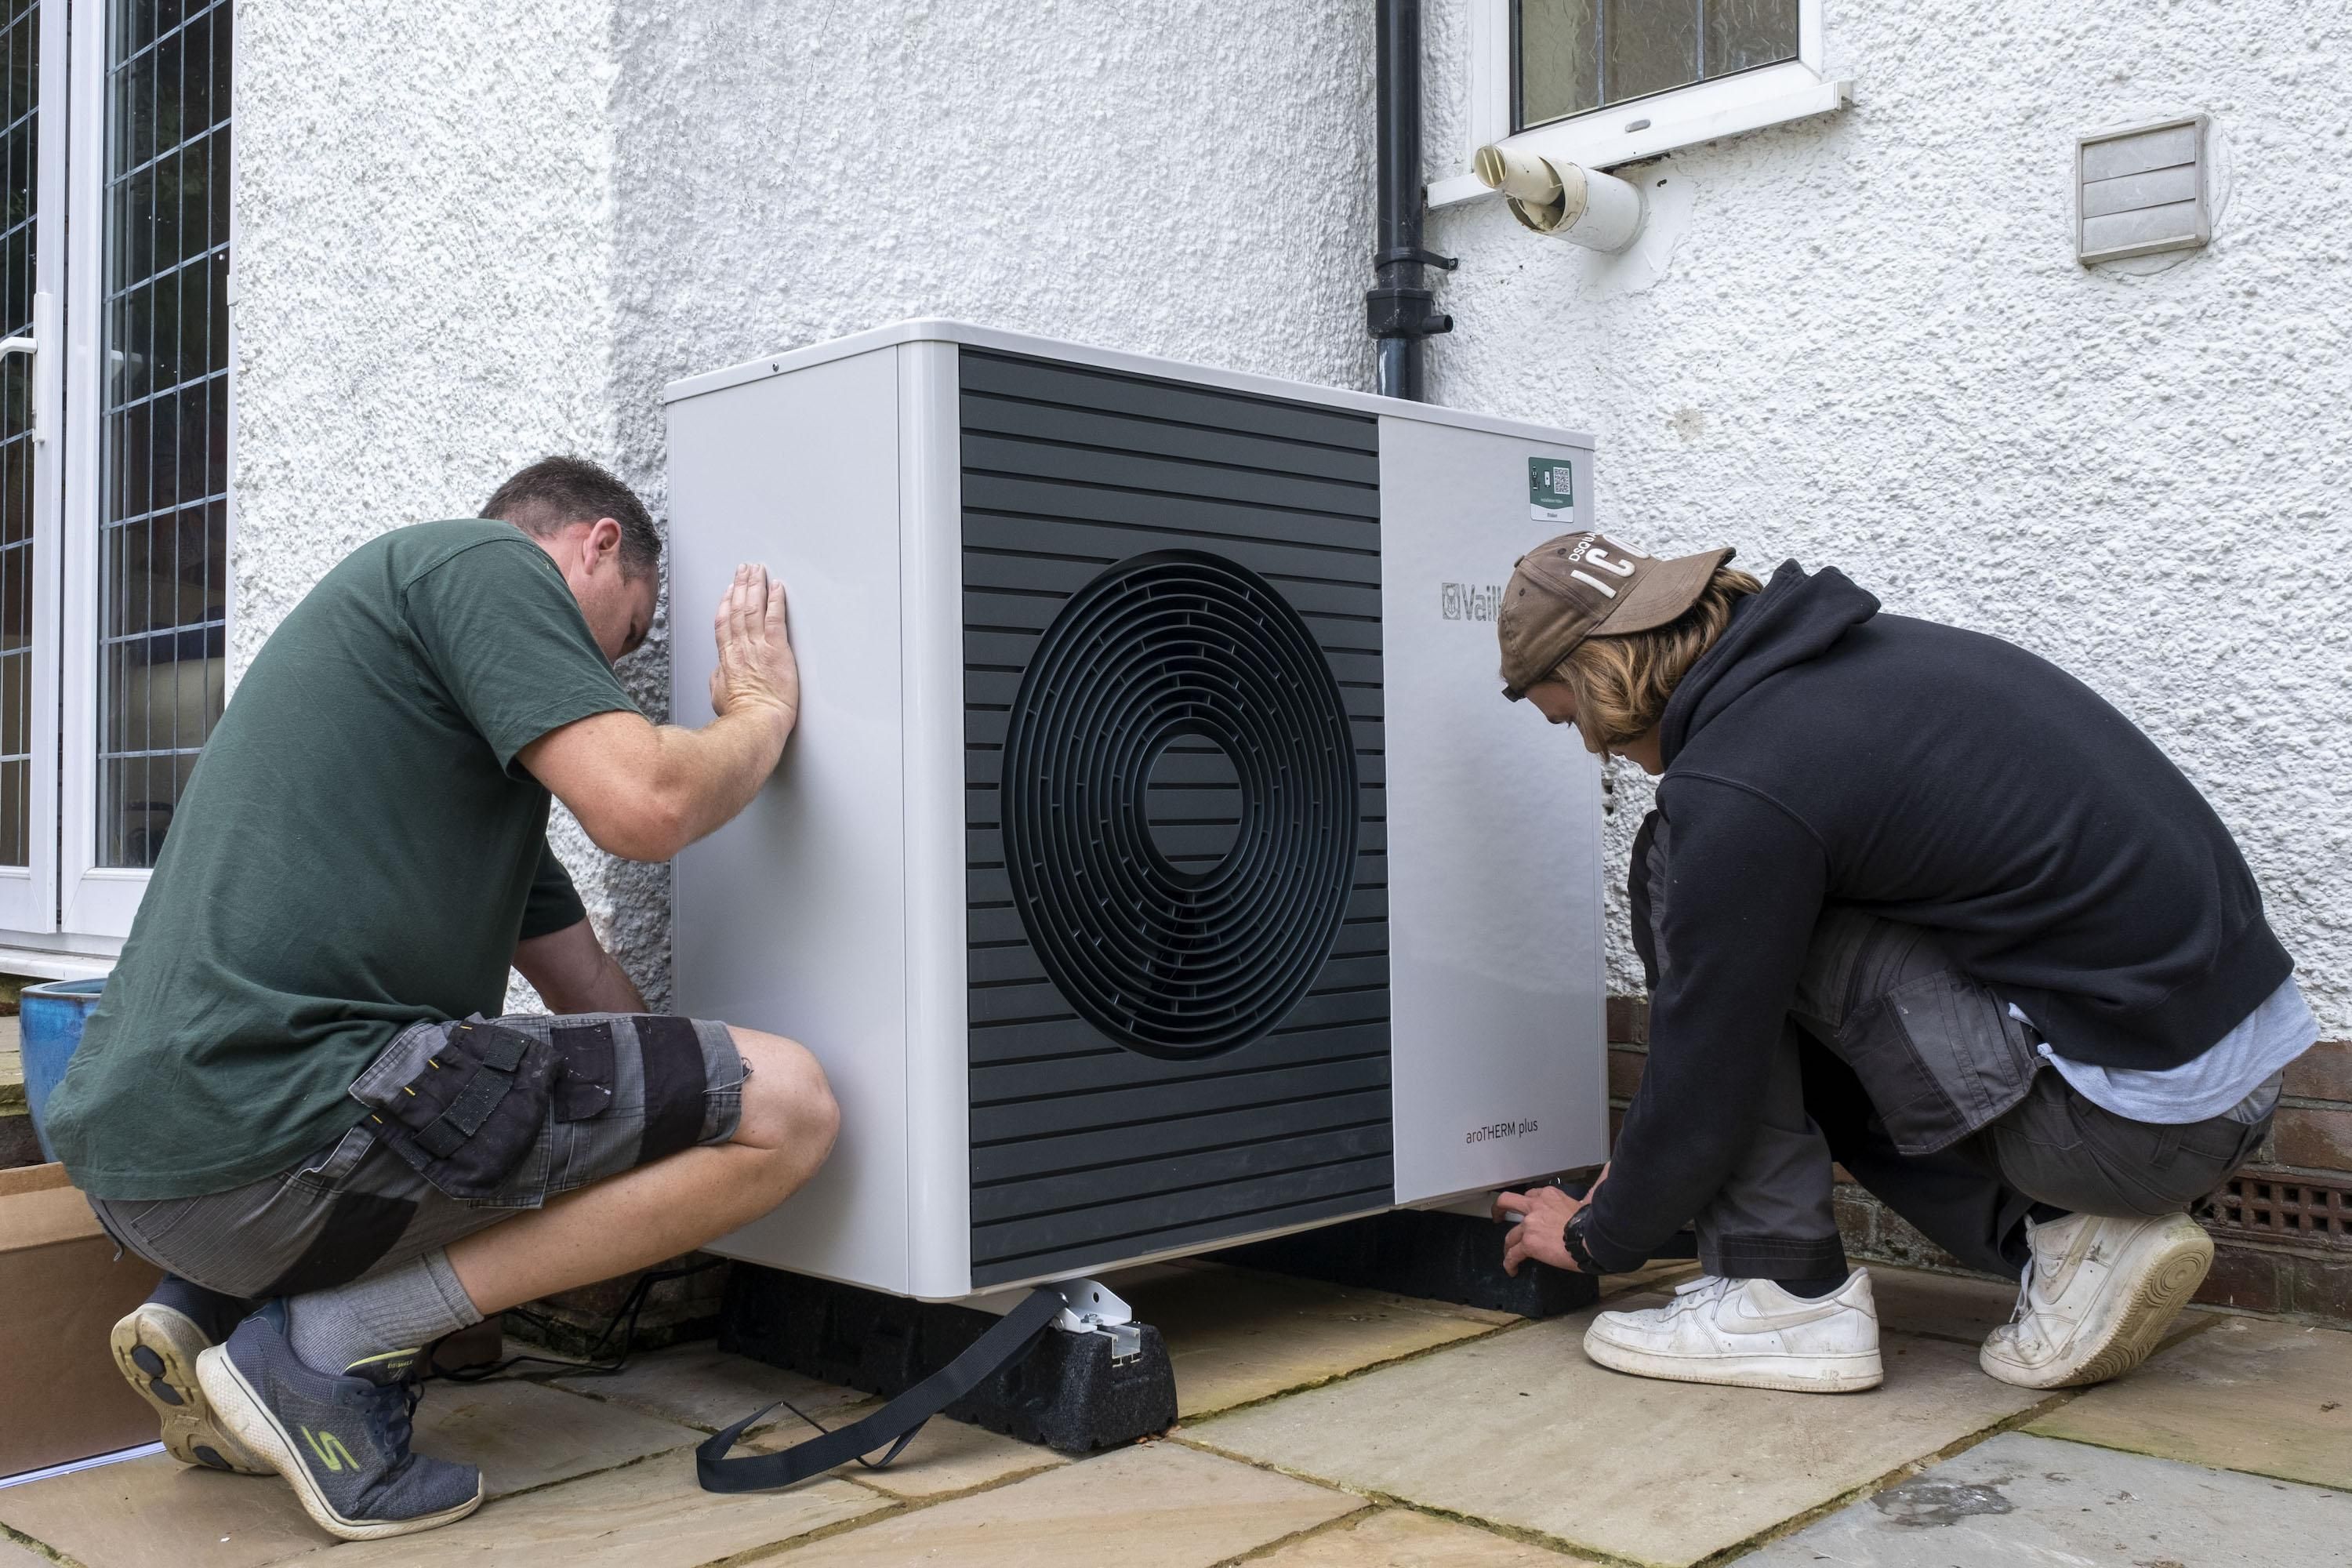 Air source heat pump installers from Solaris Energy installing a Vaillant Arotherm plus 7kw air source heat pump unit into a 1930s built house in Folkestone, United Kingdom on September 20, 2021.